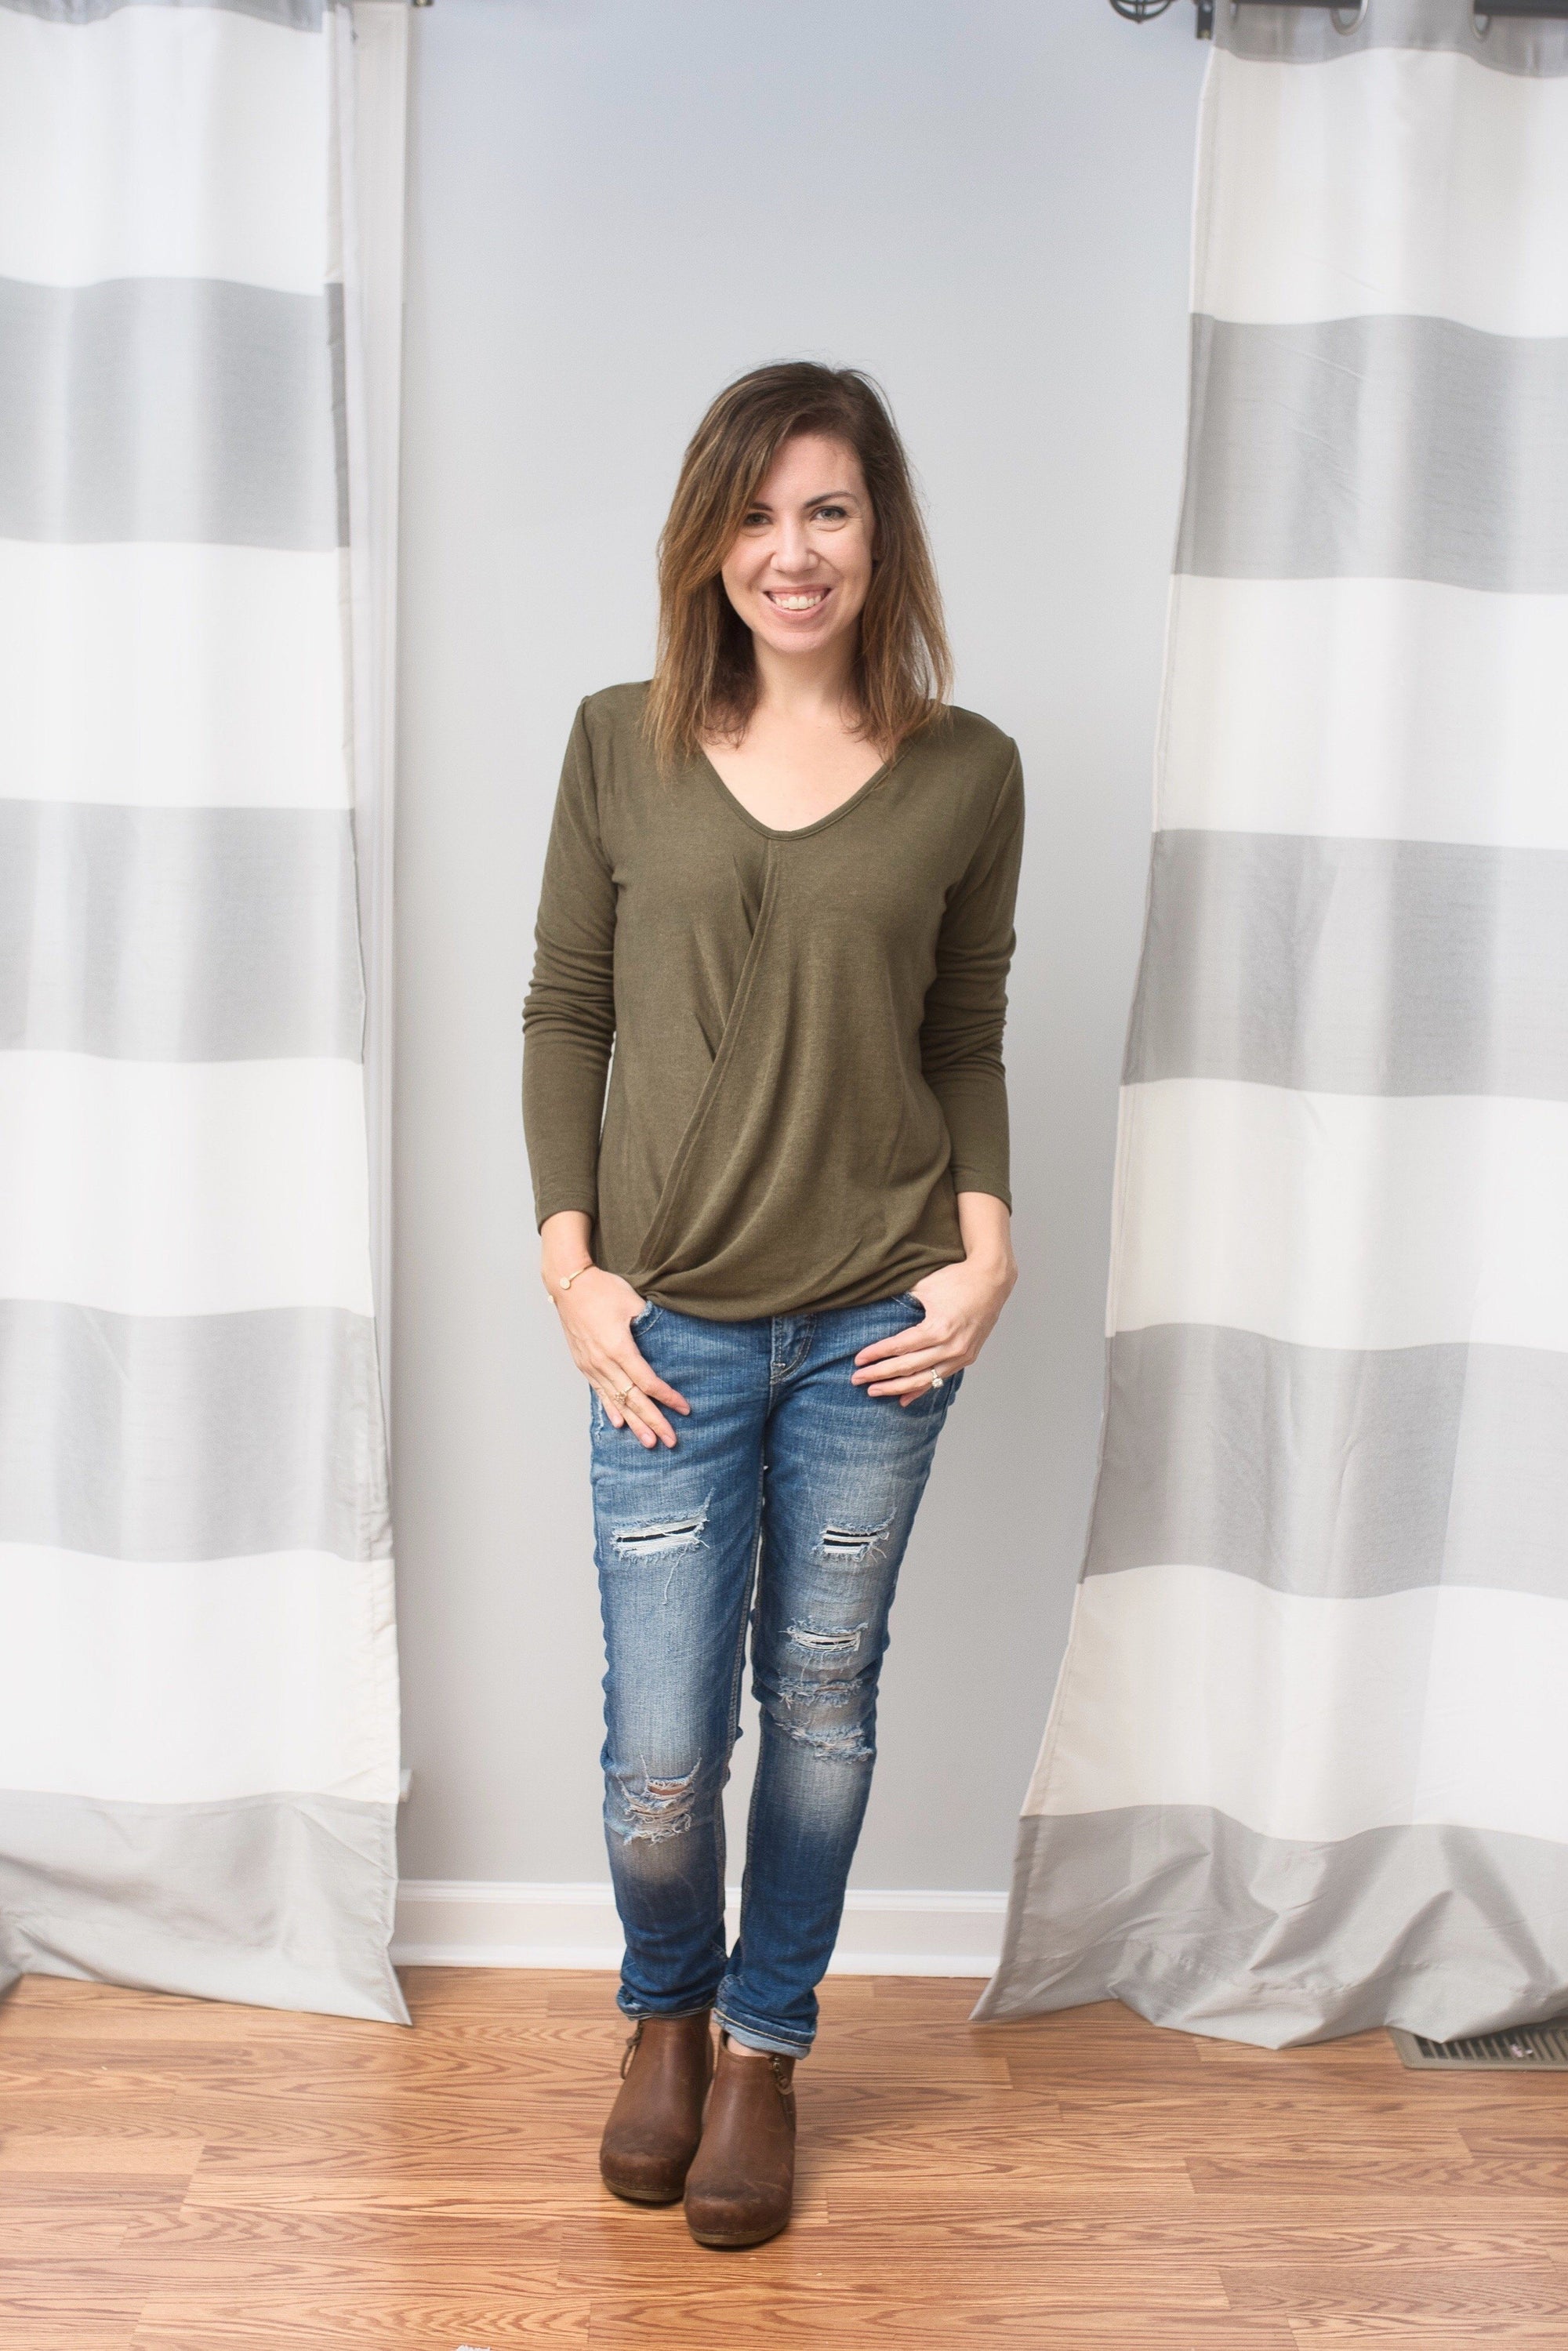 Our Favorite Bloggers Series - Mommy In Flats